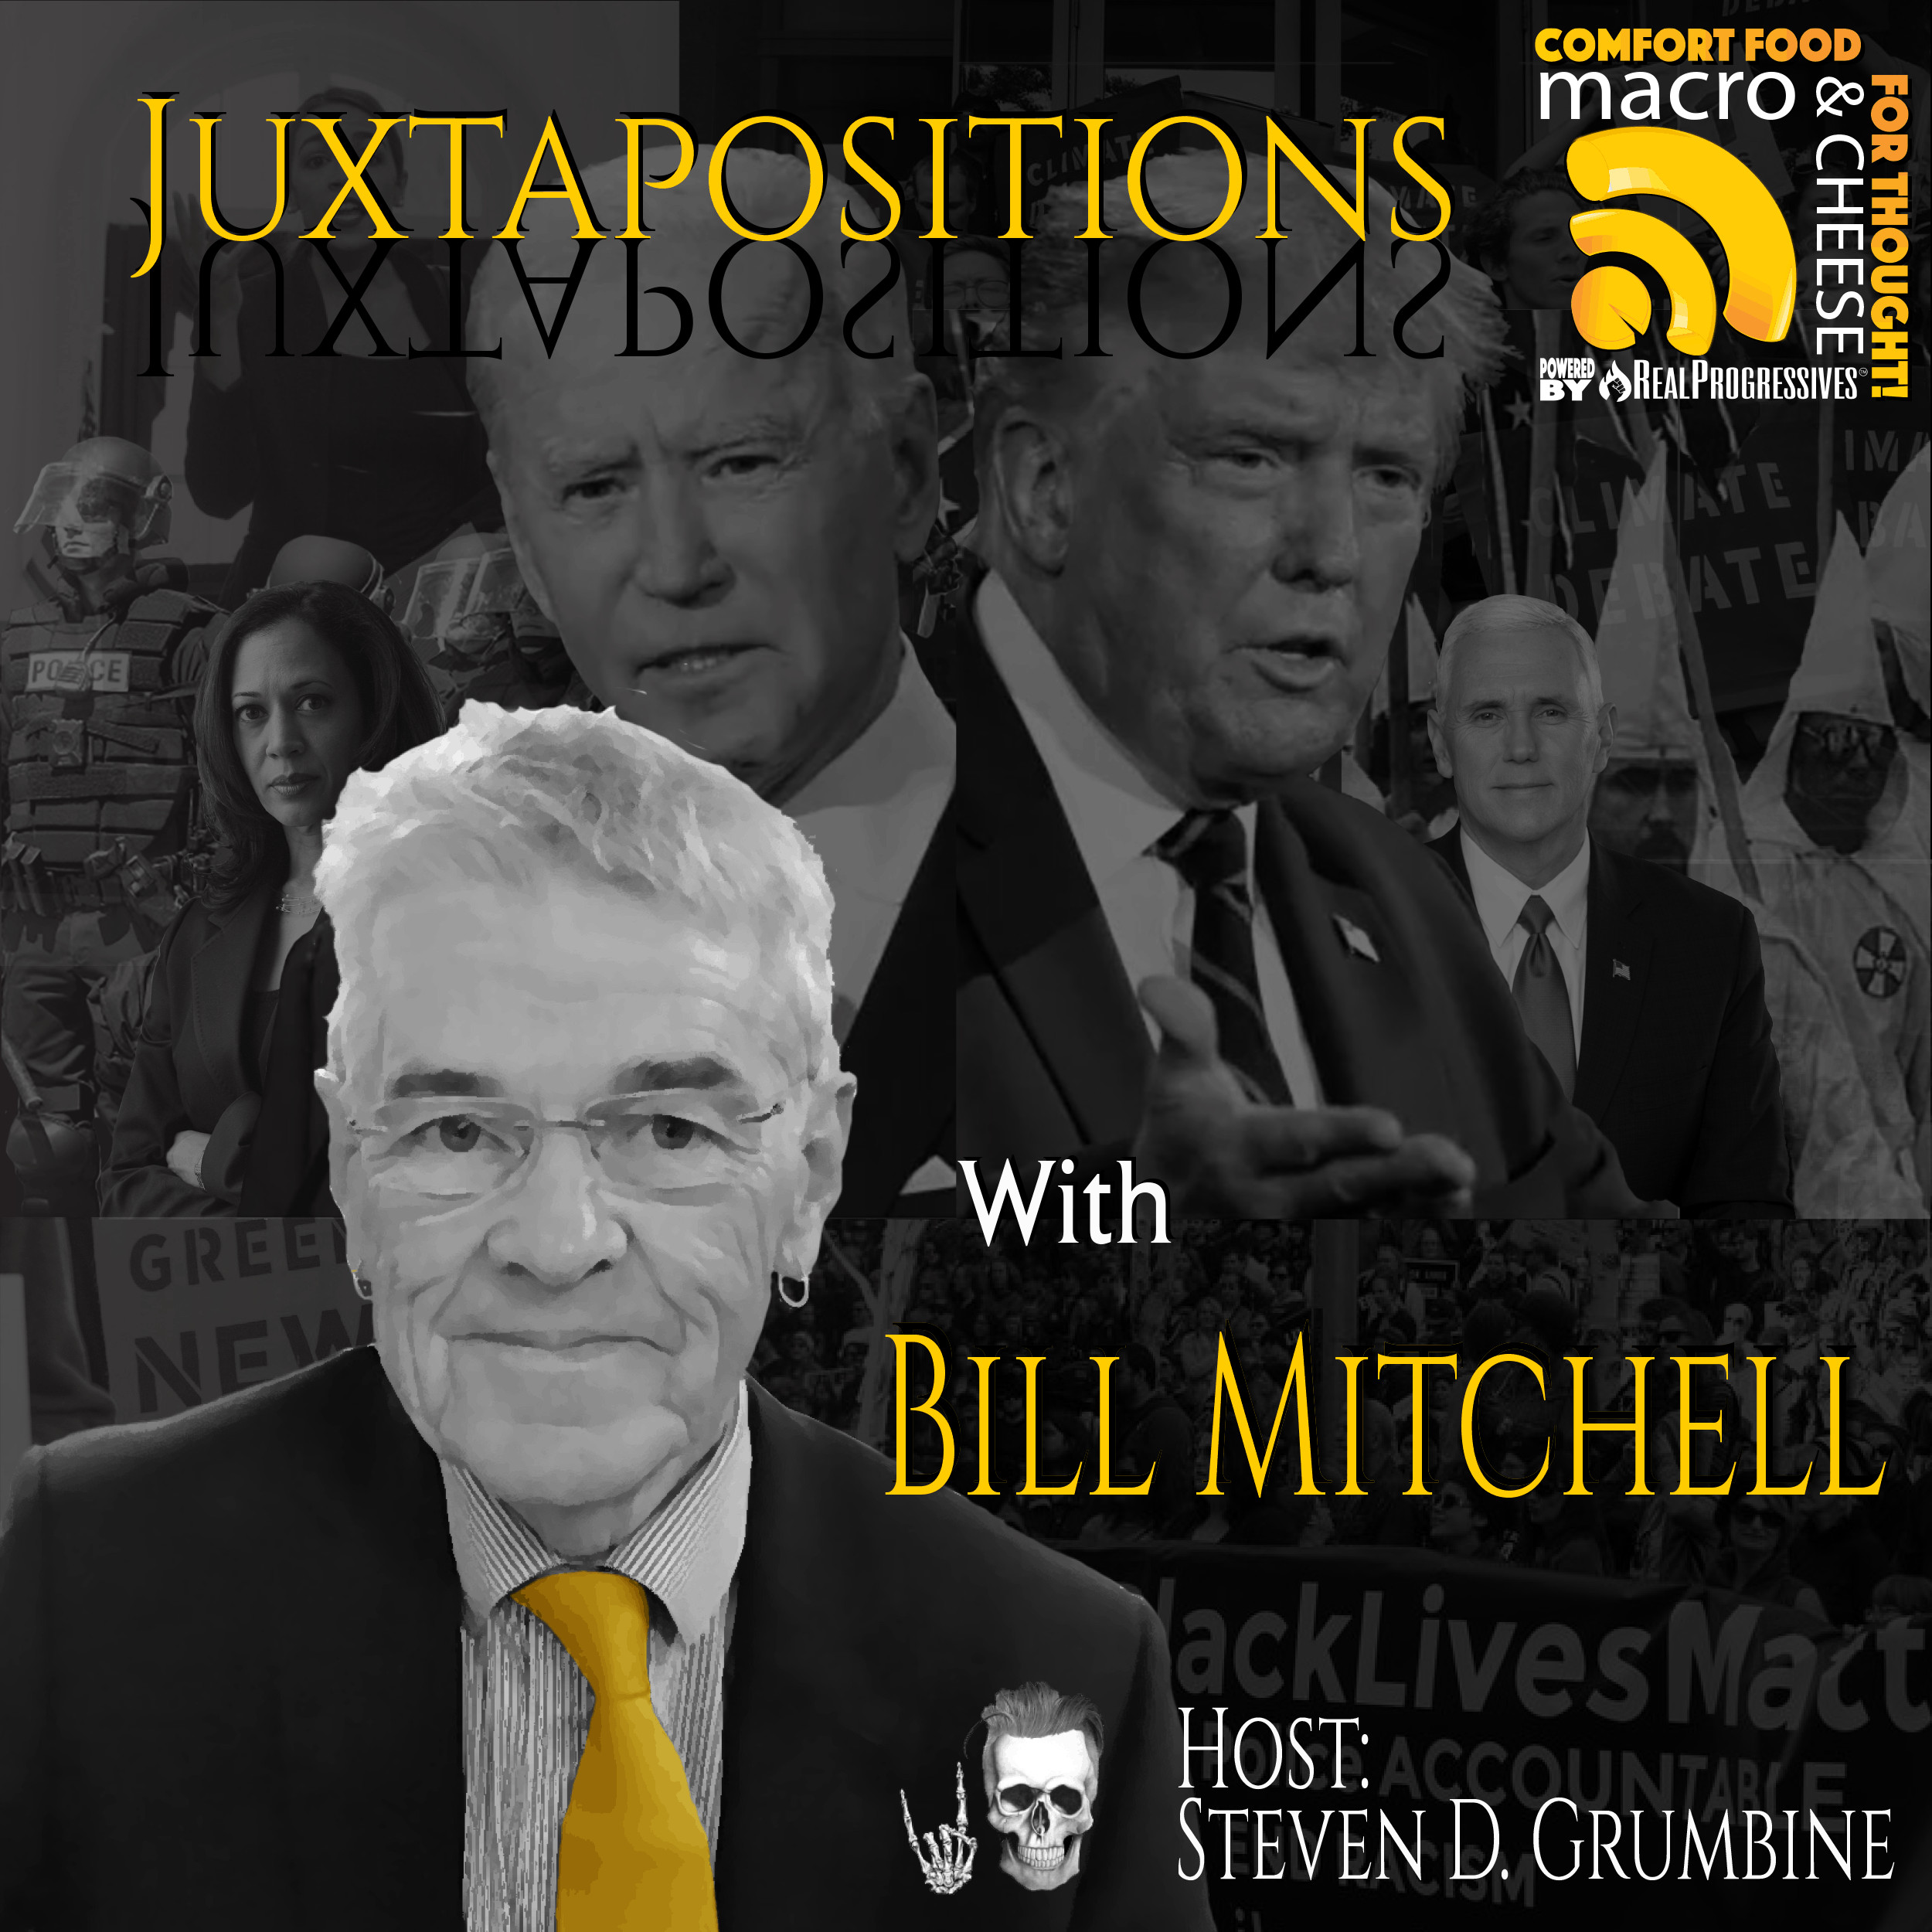 Episode 89 - Juxtapositions with Bill Mitchell